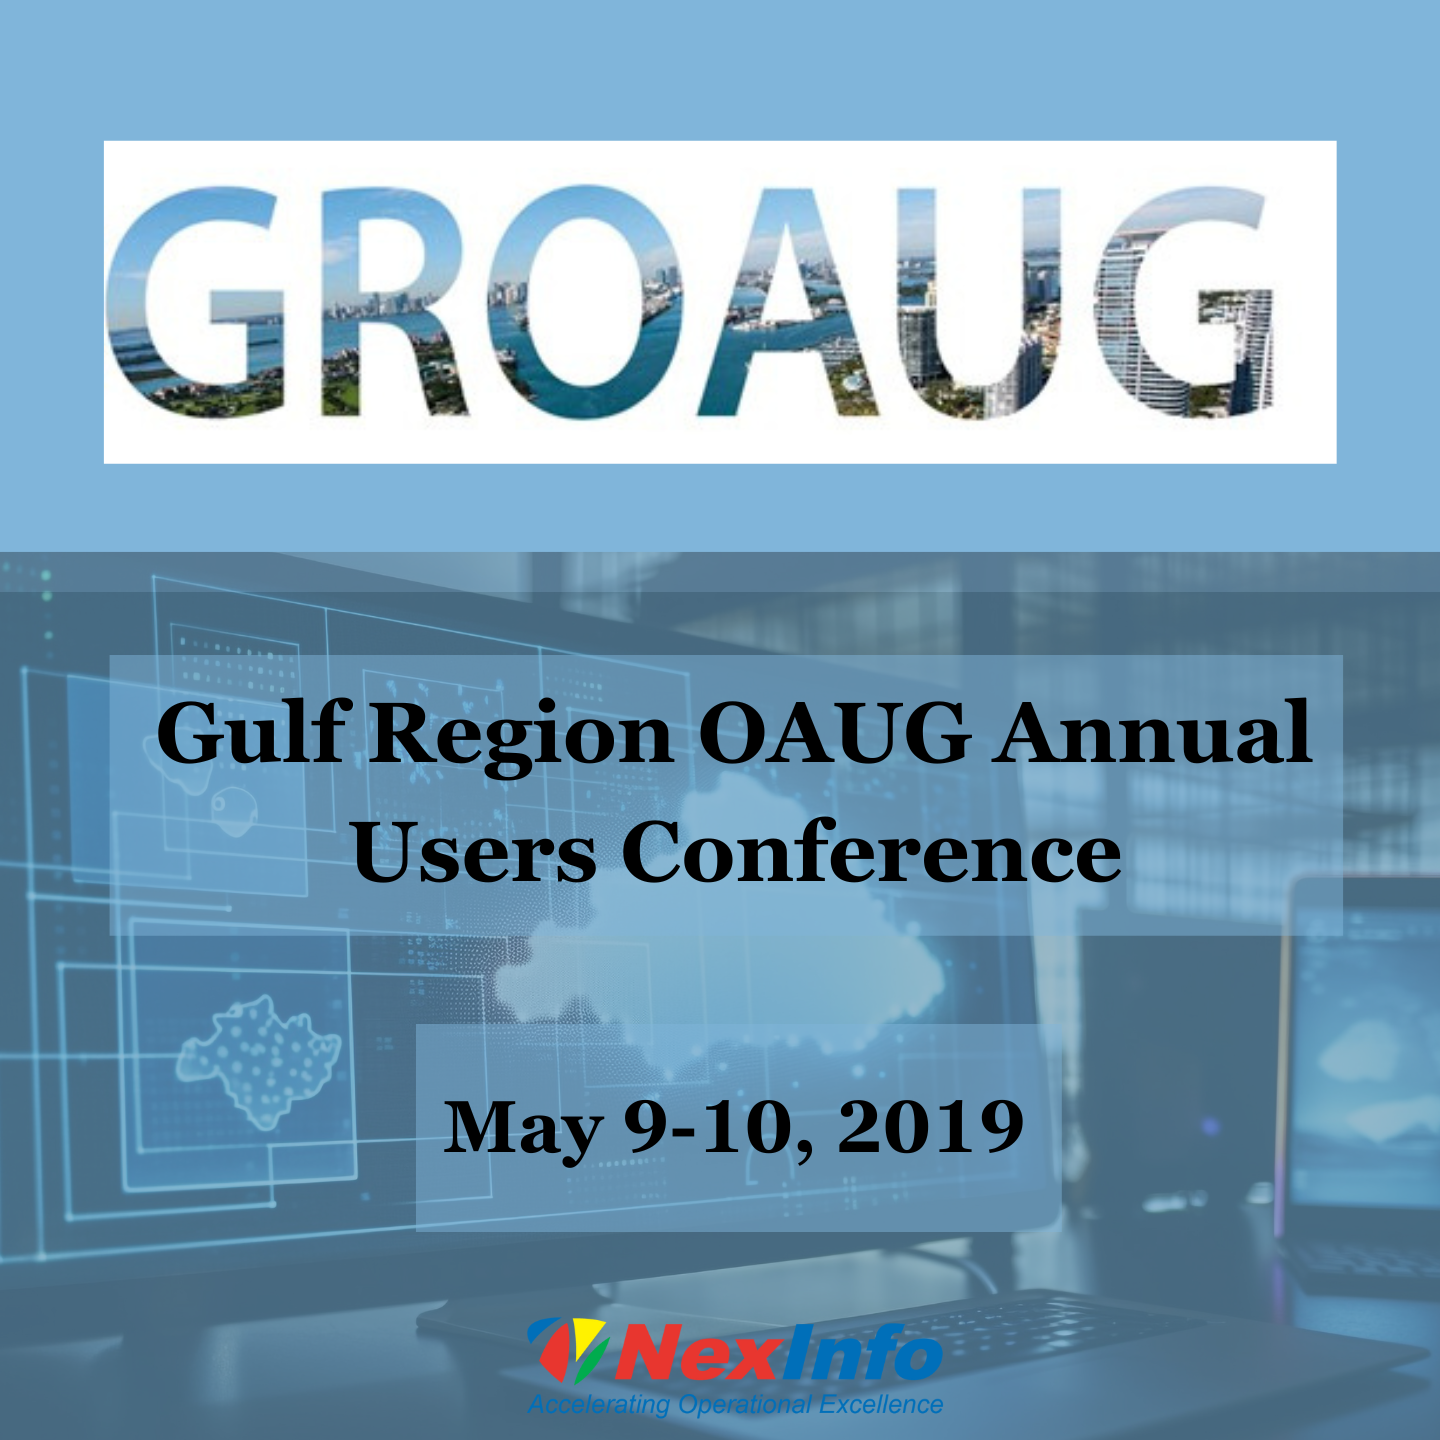 Gulf Region OAUG Annual Users Conference